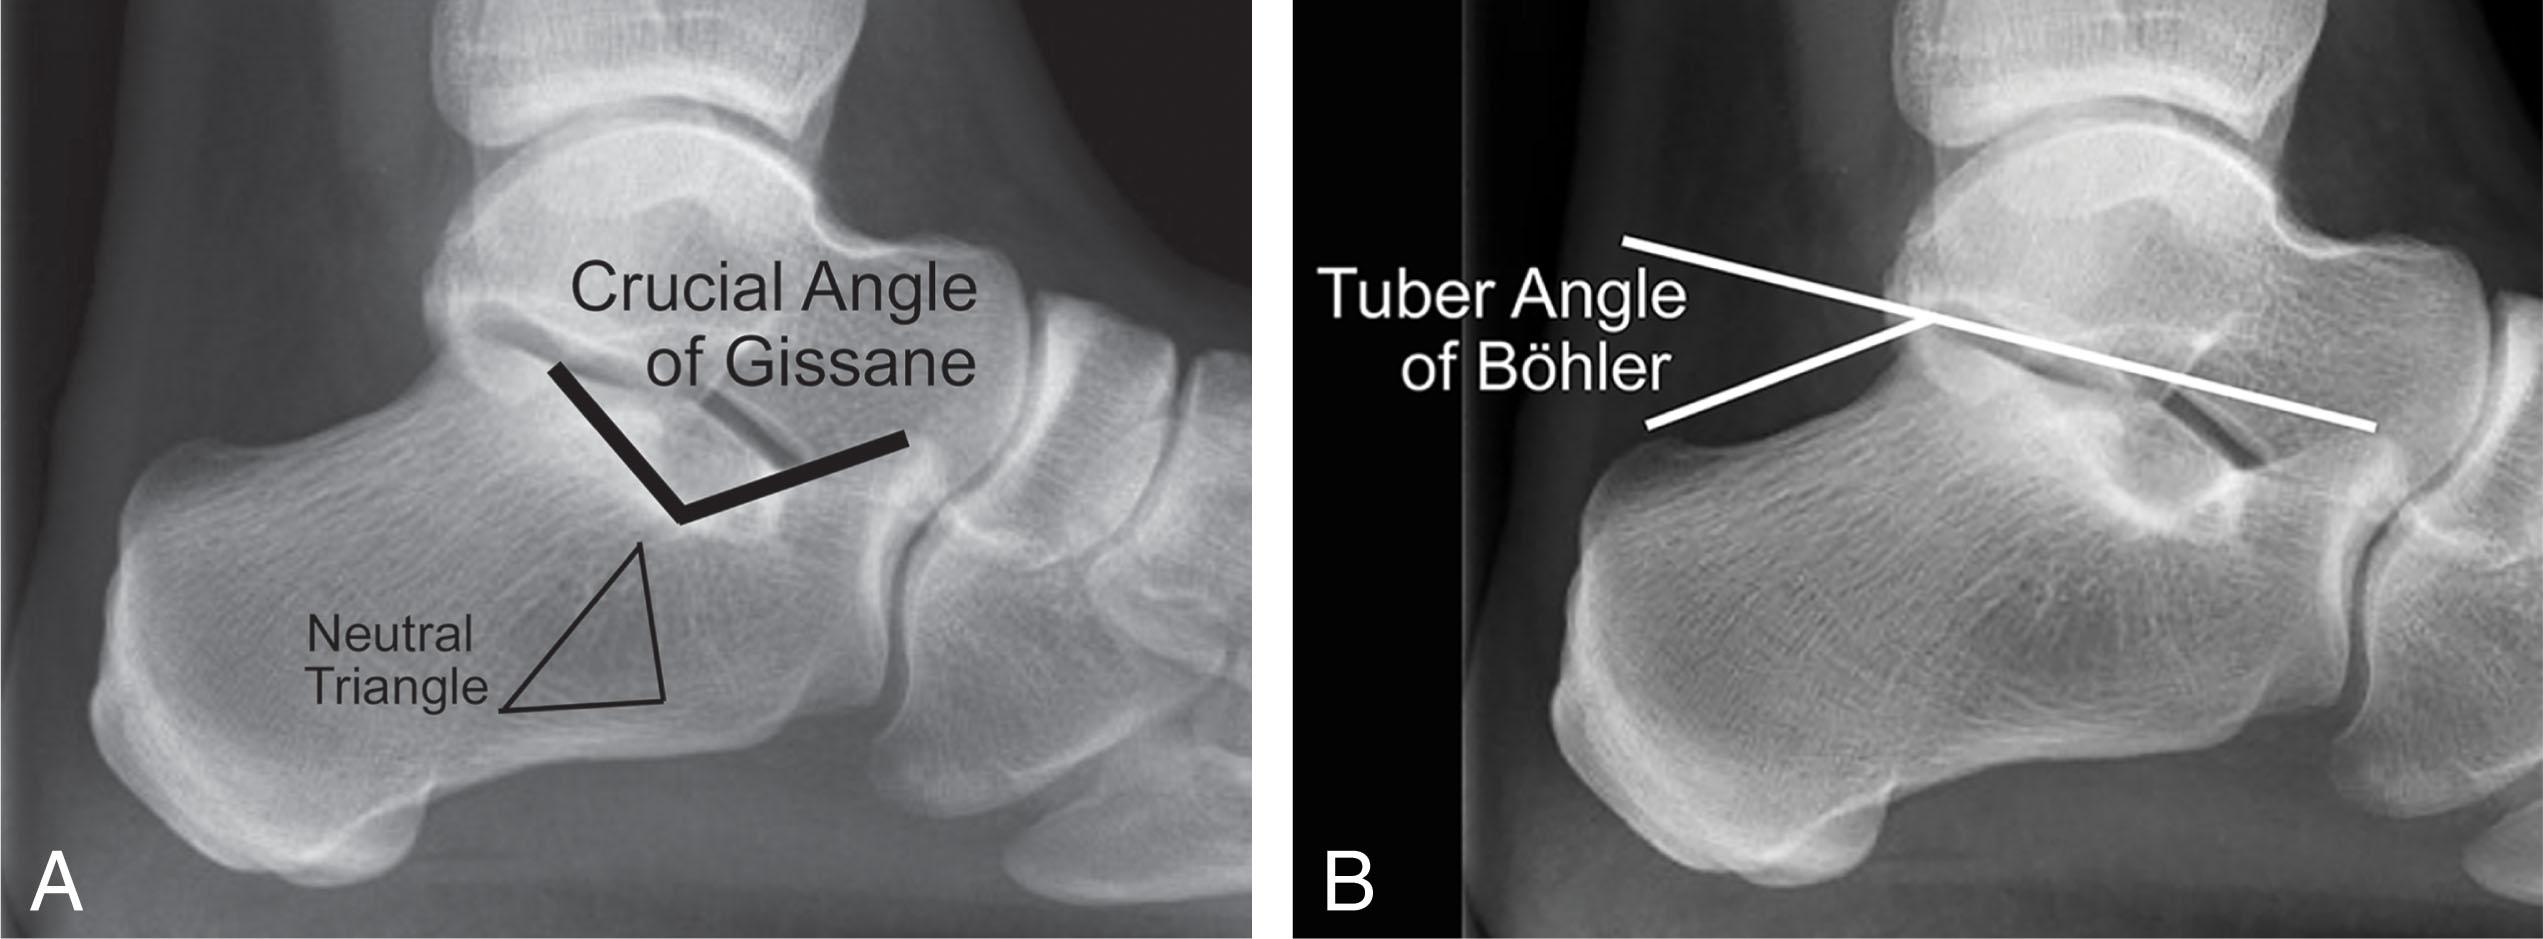 Fig. 45-4, Lateral radiograph of ankle. A , The neutral triangle and crucial angle of Gissane. B , The tuber angle of Böhler.